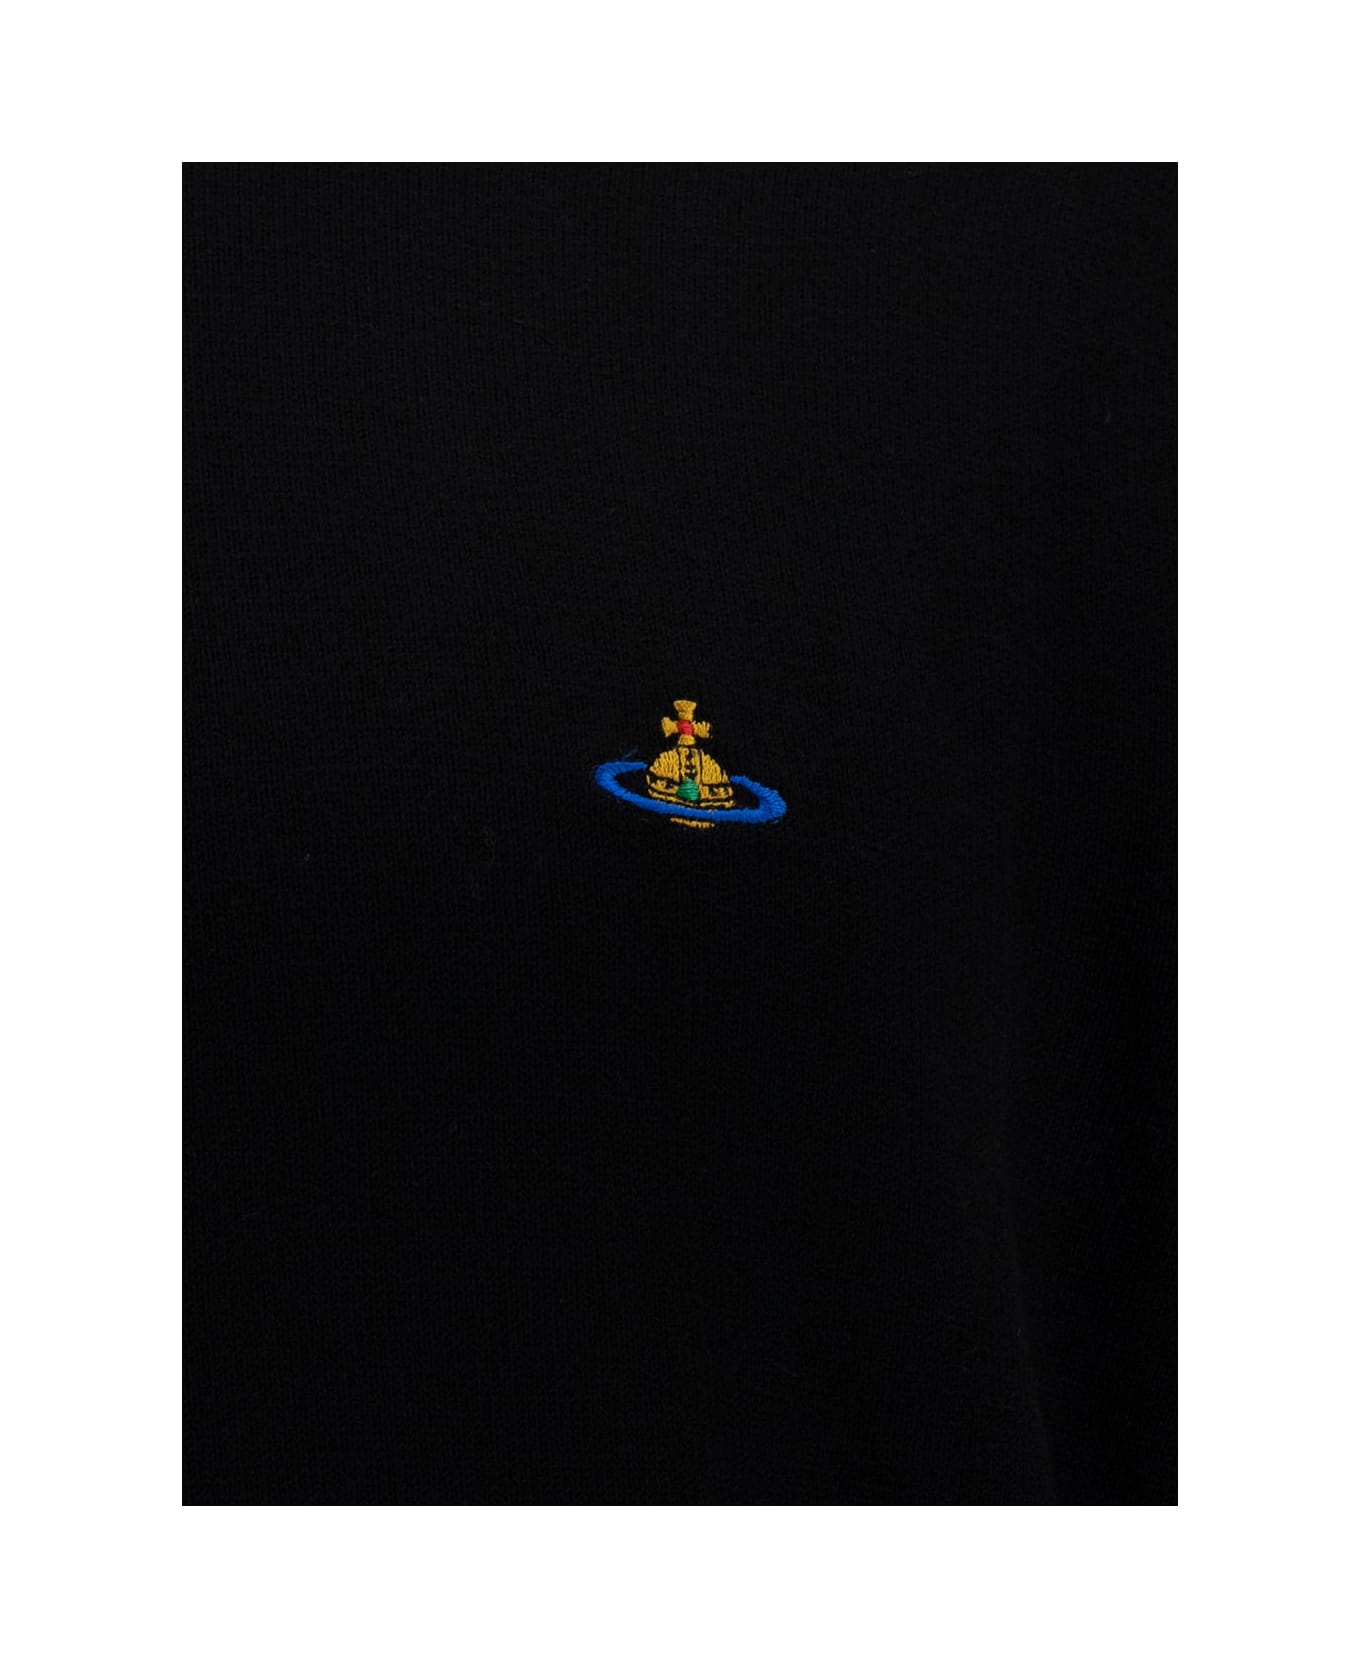 Vivienne Westwood Black Crewneck Sweater With Orb Embroidery In Cotton And Cashmere Man - Black ニットウェア